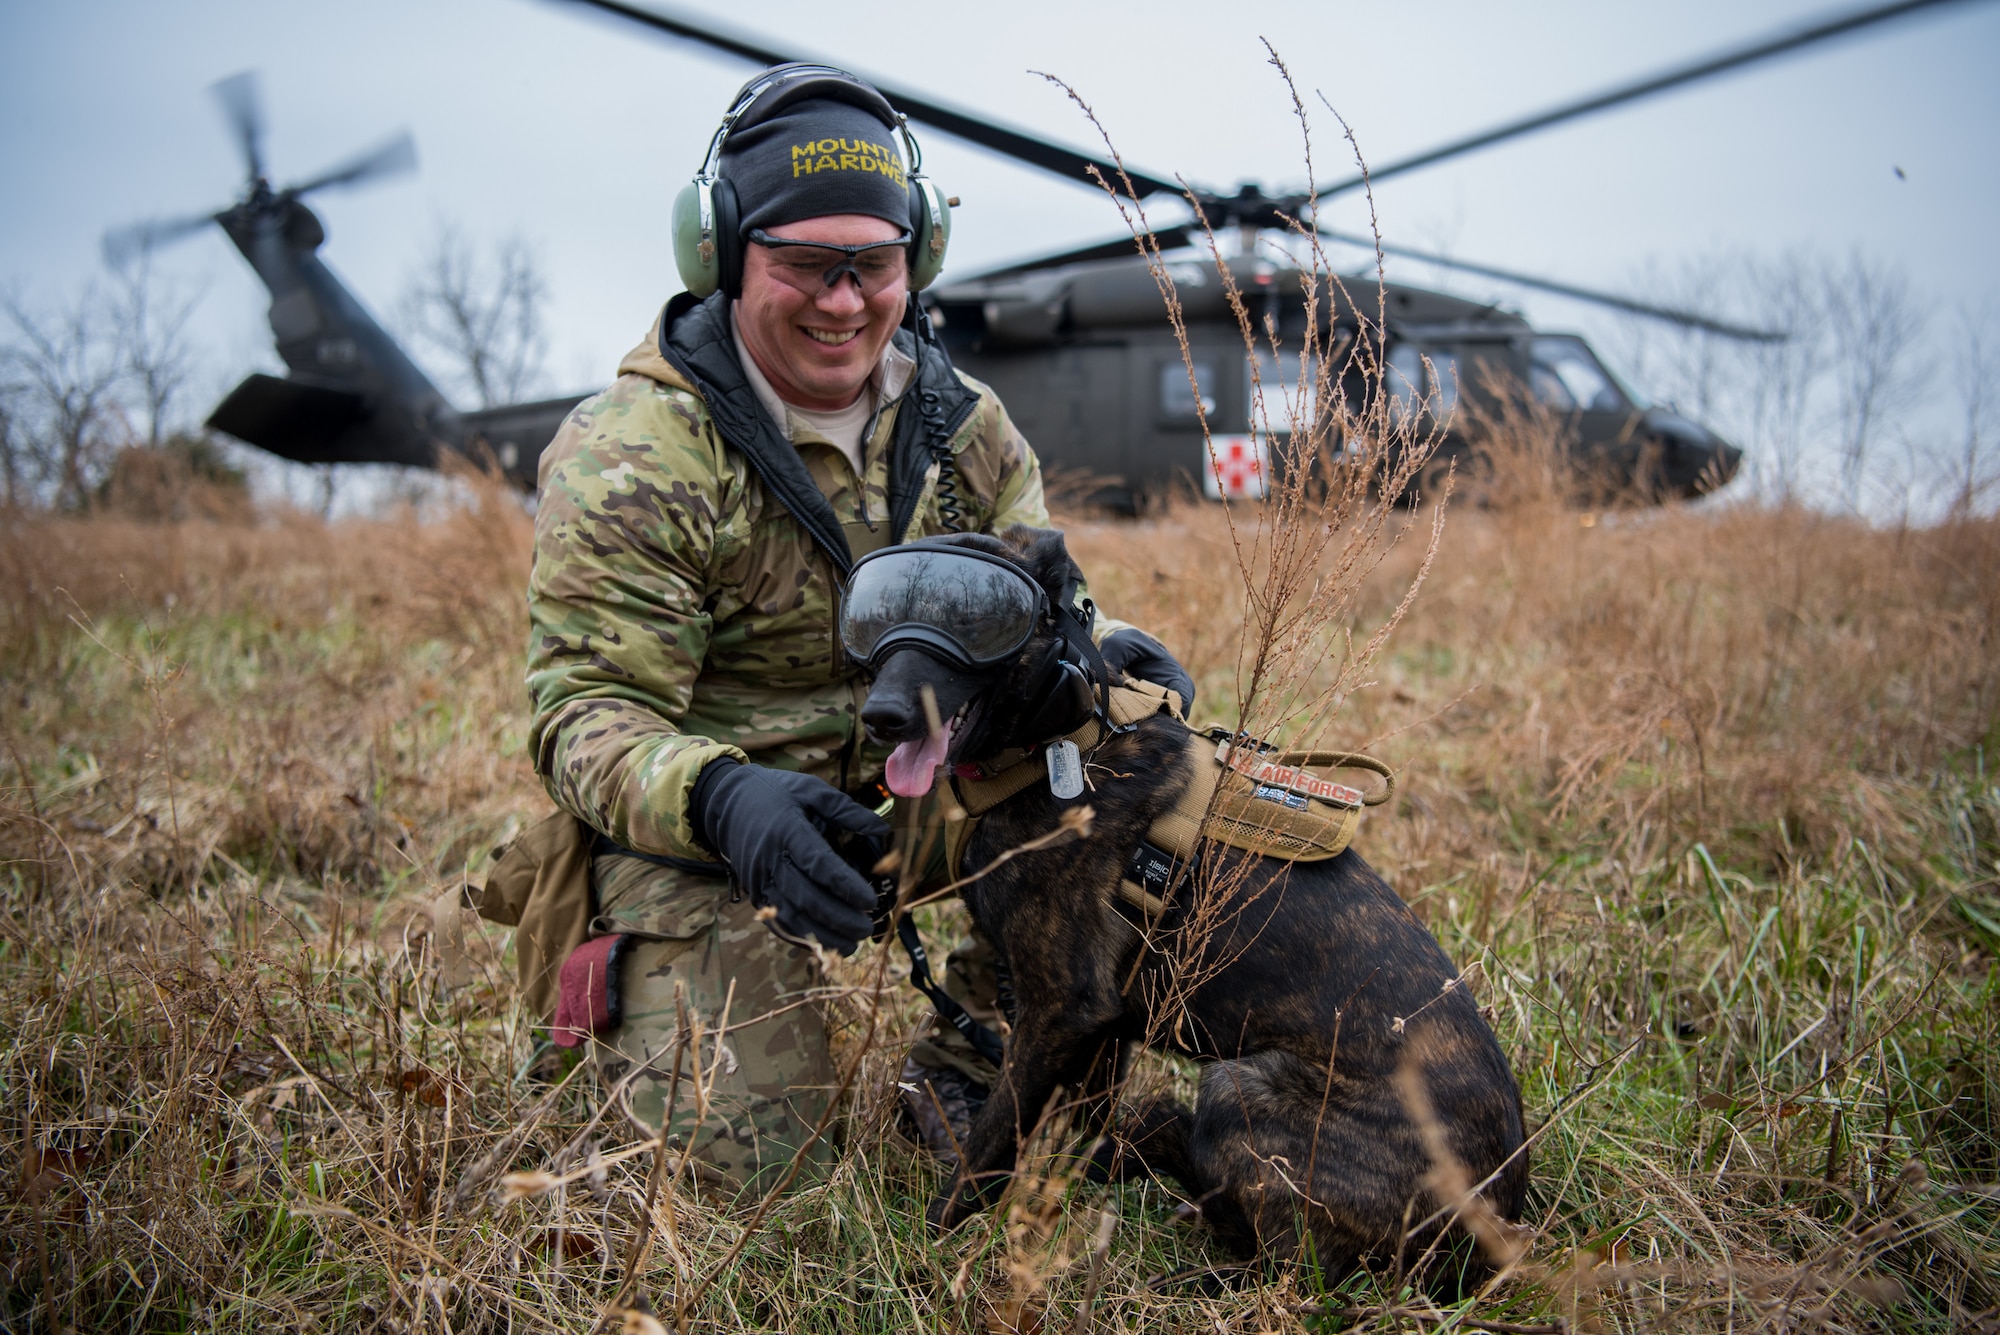 Tech. Sgt. Rudy Parsons, a pararescueman with the Kentucky Air National Guard’s 123rd Special Tactics Squadron, and his search and rescue dog, Callie, exit a UH-60 Black Hawk helicopter as part of Callie’s familiarization training at the Boone National Guard Center in Frankfort, Ky., Nov. 29, 2018. Callie is currently the only search and rescue dog in the Department of Defense. (U.S. Air National Guard photo by Staff Sgt. Joshua Horton)